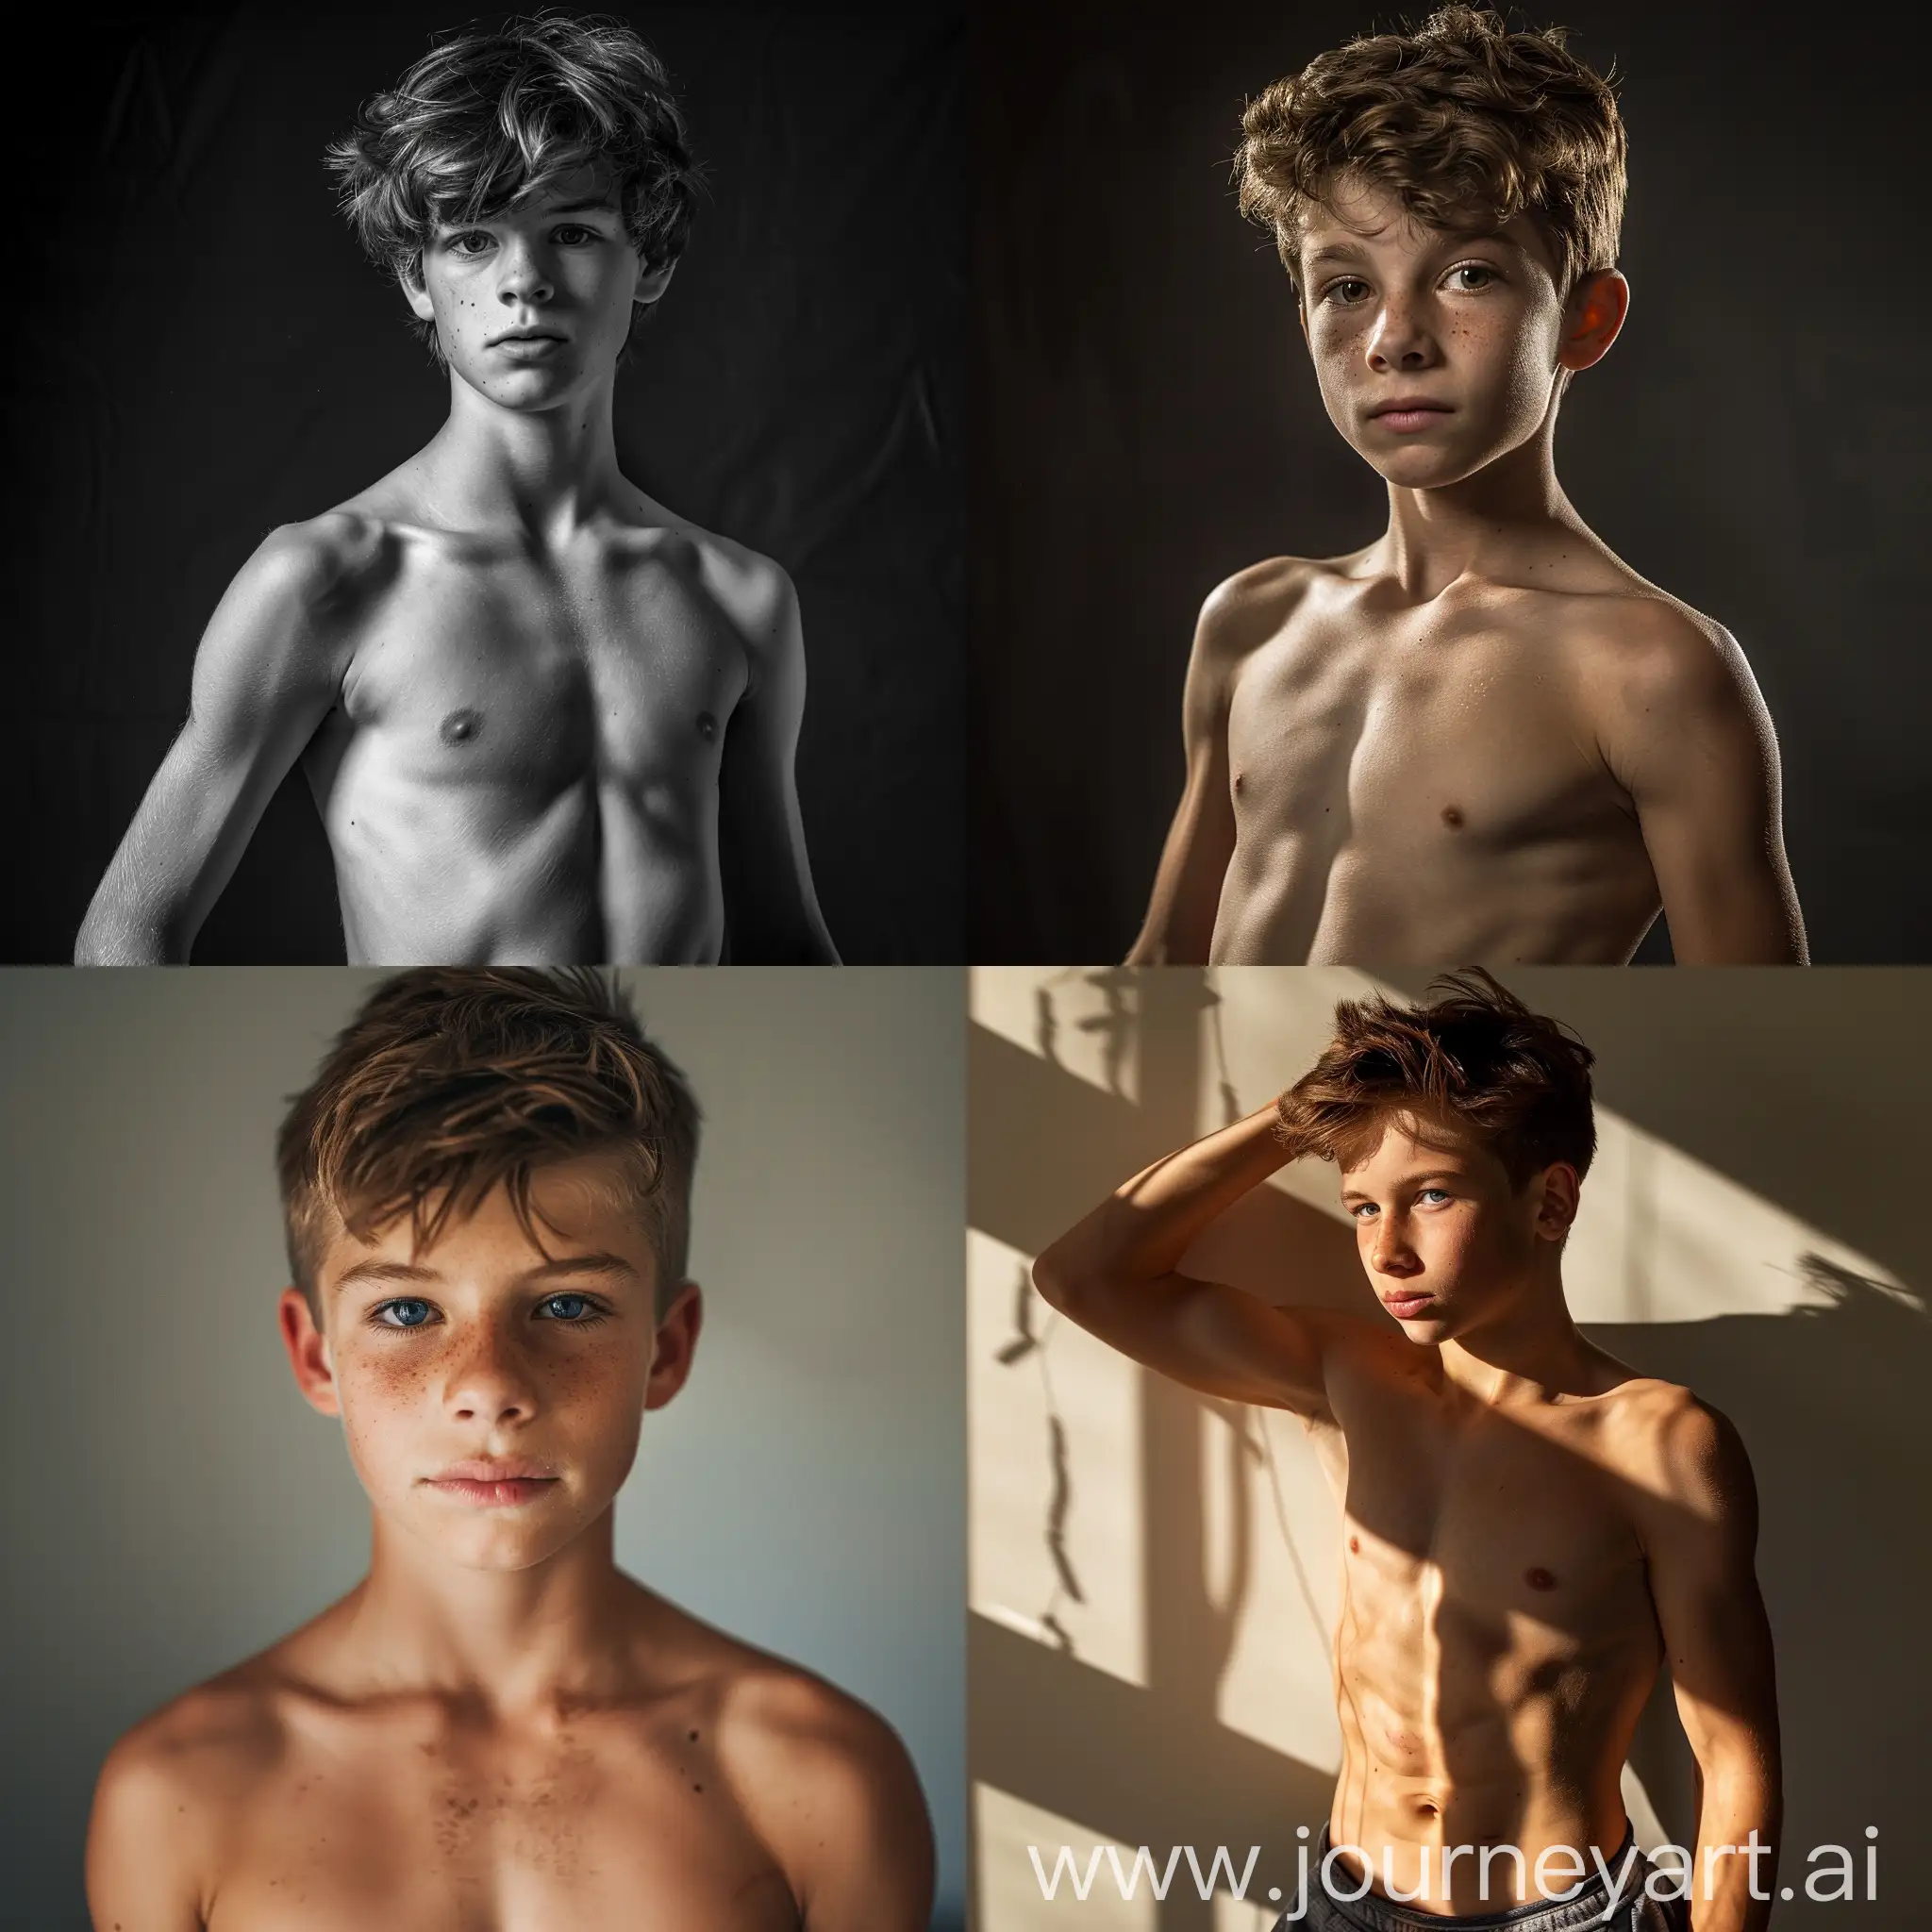 Fit-Teenage-Boy-with-Impressive-SixPack-Abs